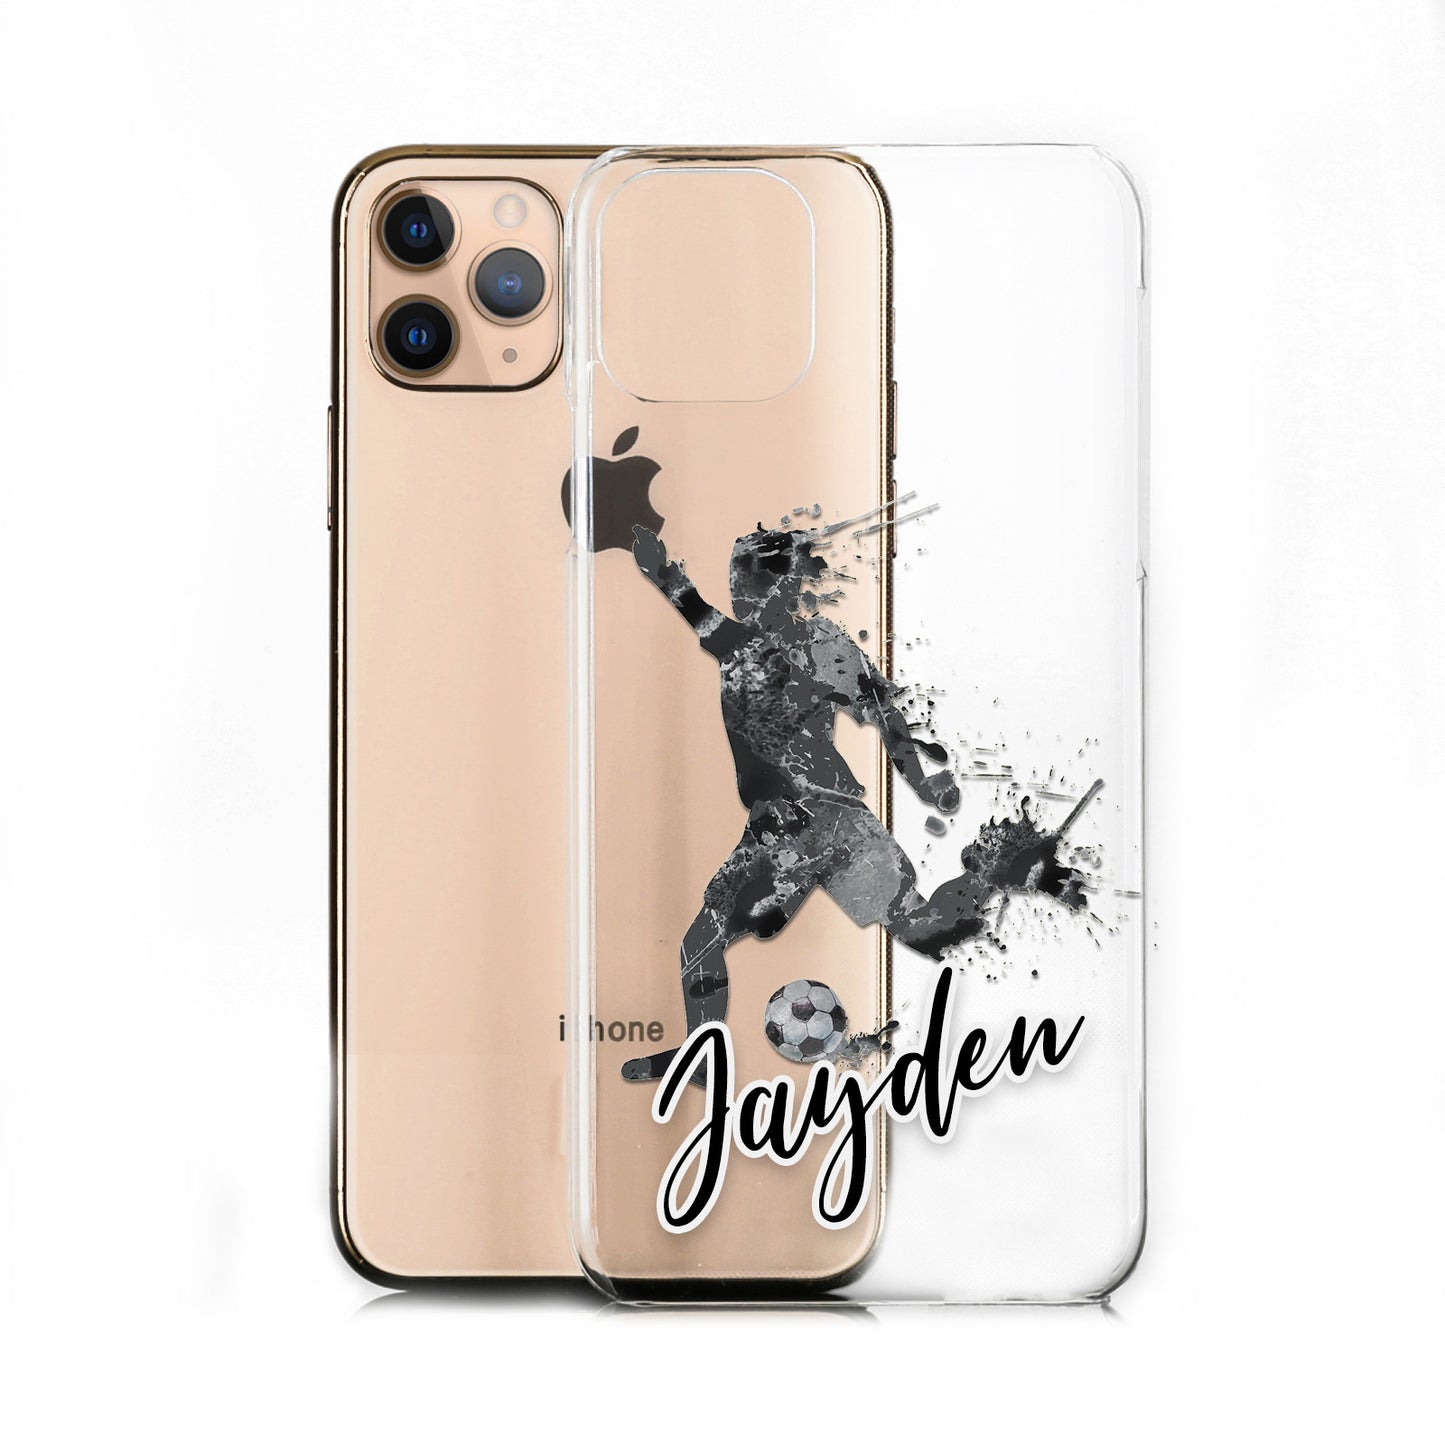 Personalised Nokia Phone Hard Case - Ash Grey Football Star with White Outlined Text